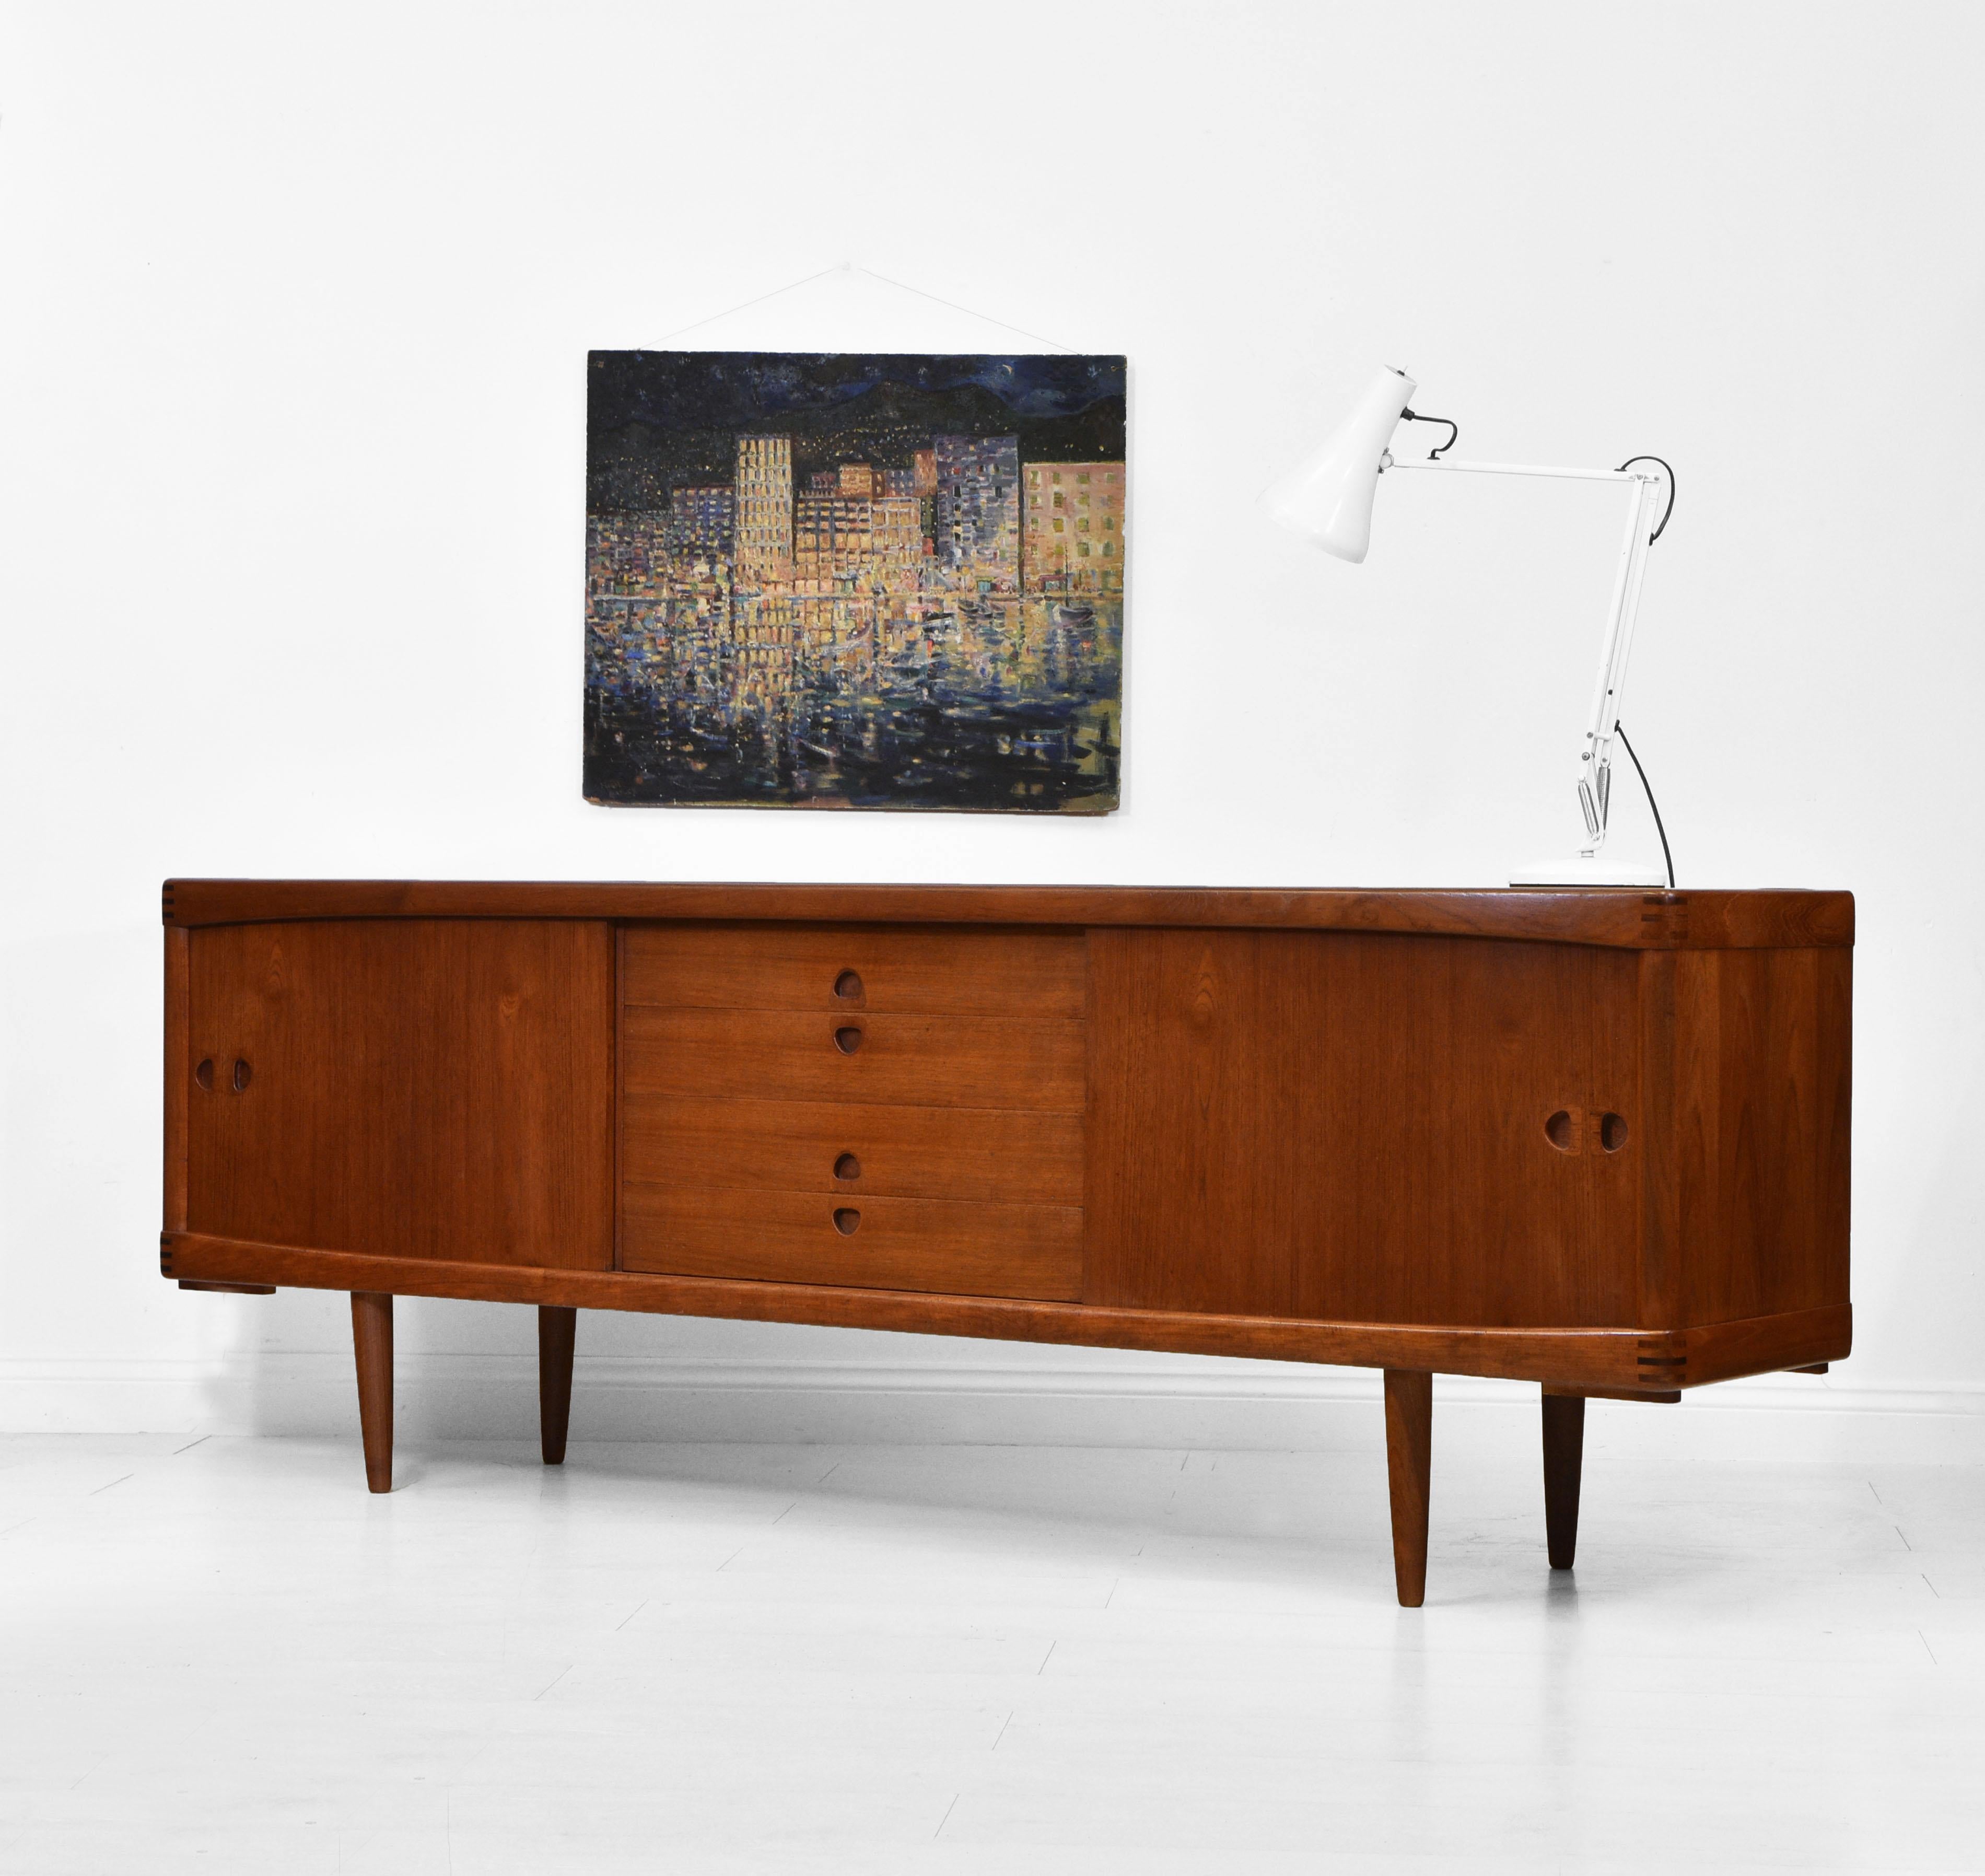 A Danish mid-century teak sideboard designed by Henry Klein for Bramin, Denmark. Circa 1960s.

A superbly designed sideboard with sculptured inset handles and rosewood finger joint detail to the corners. It has a lovely rich colour, and is in good